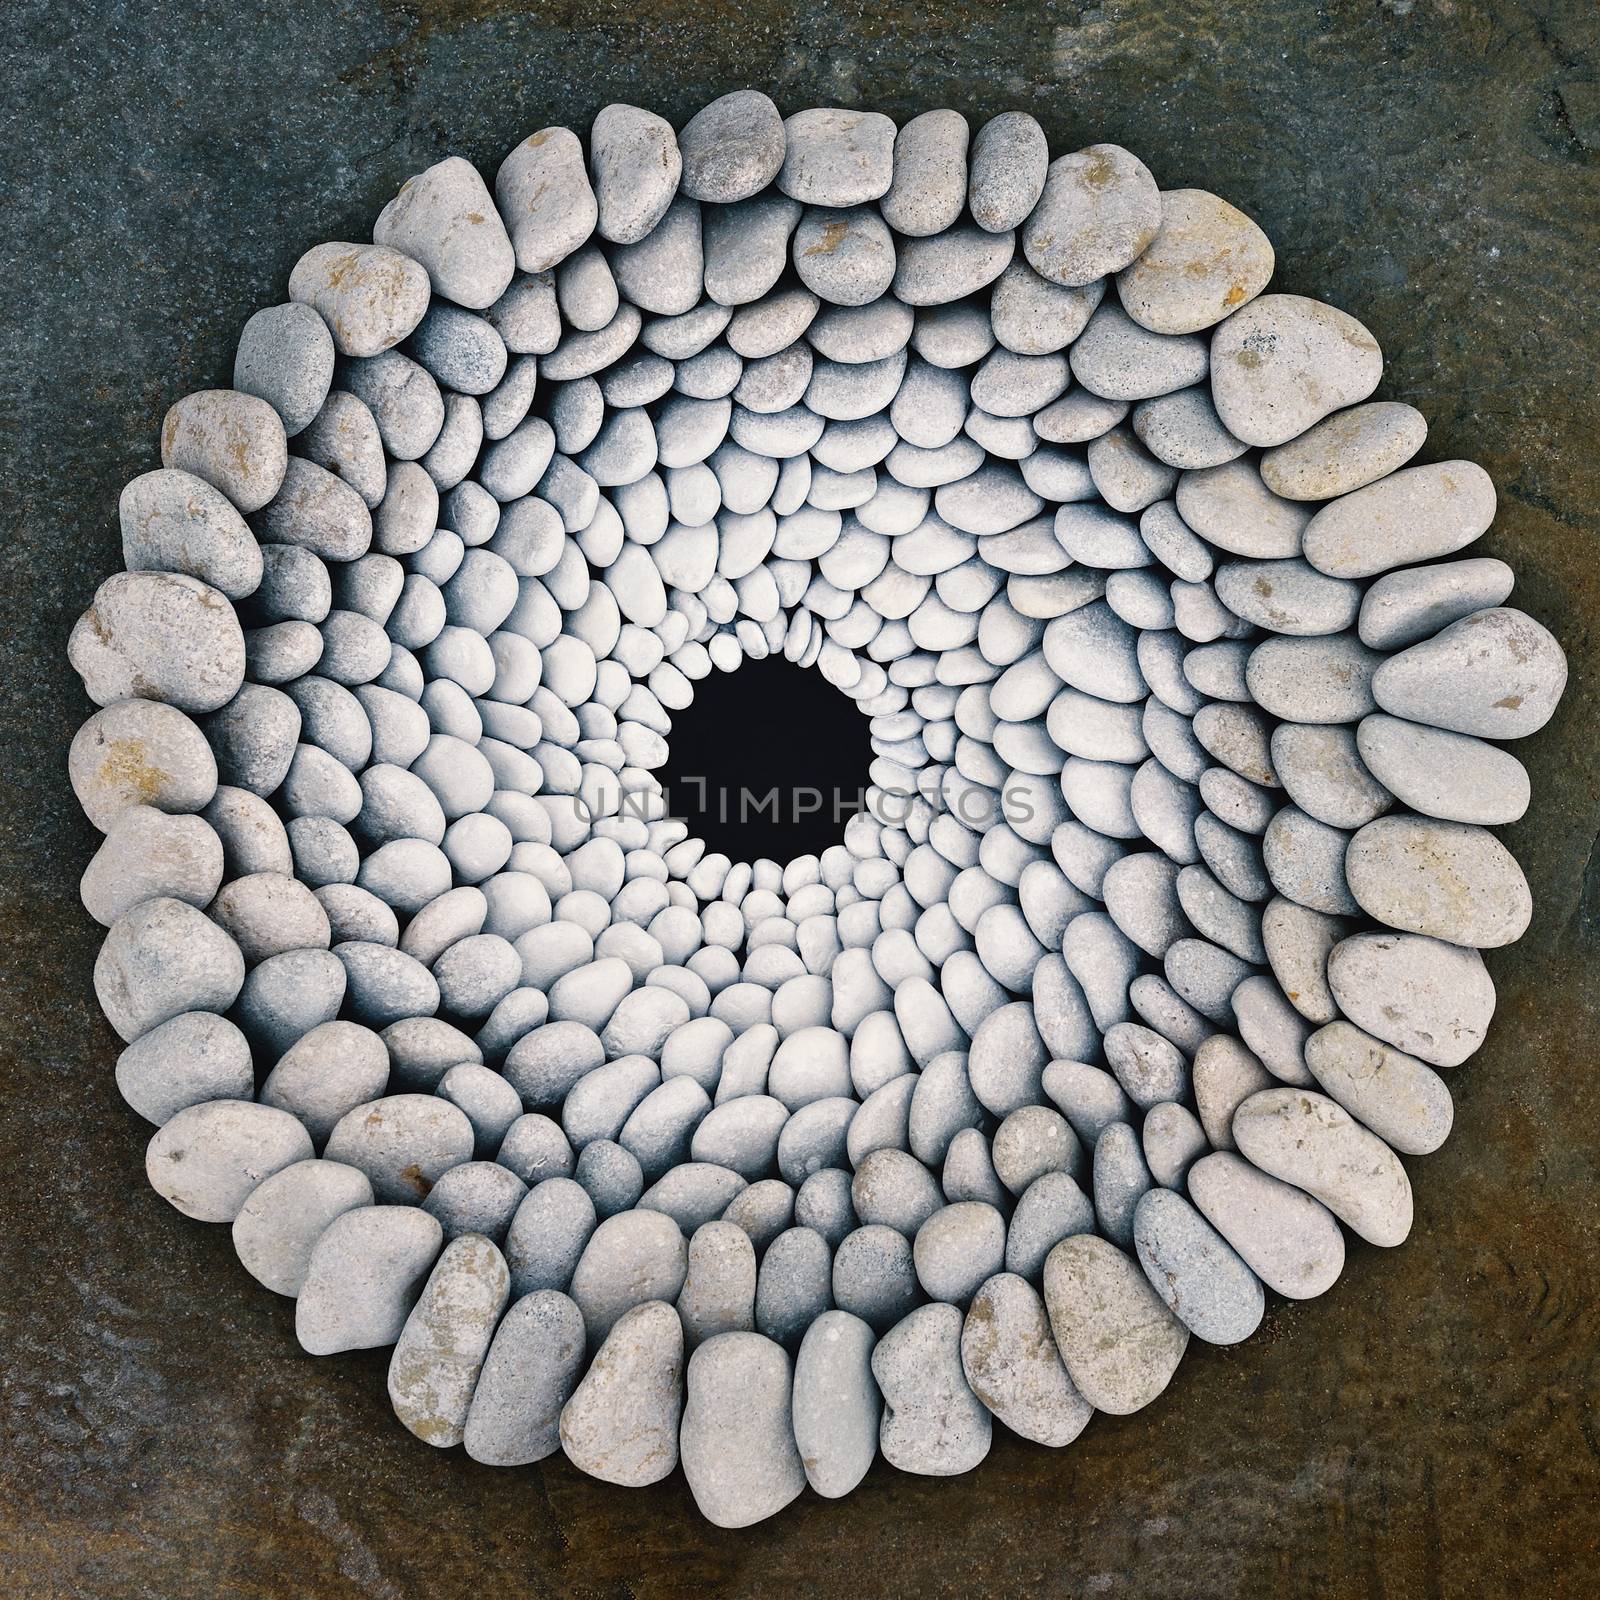 Sequence of stones laid out in the form of a circle